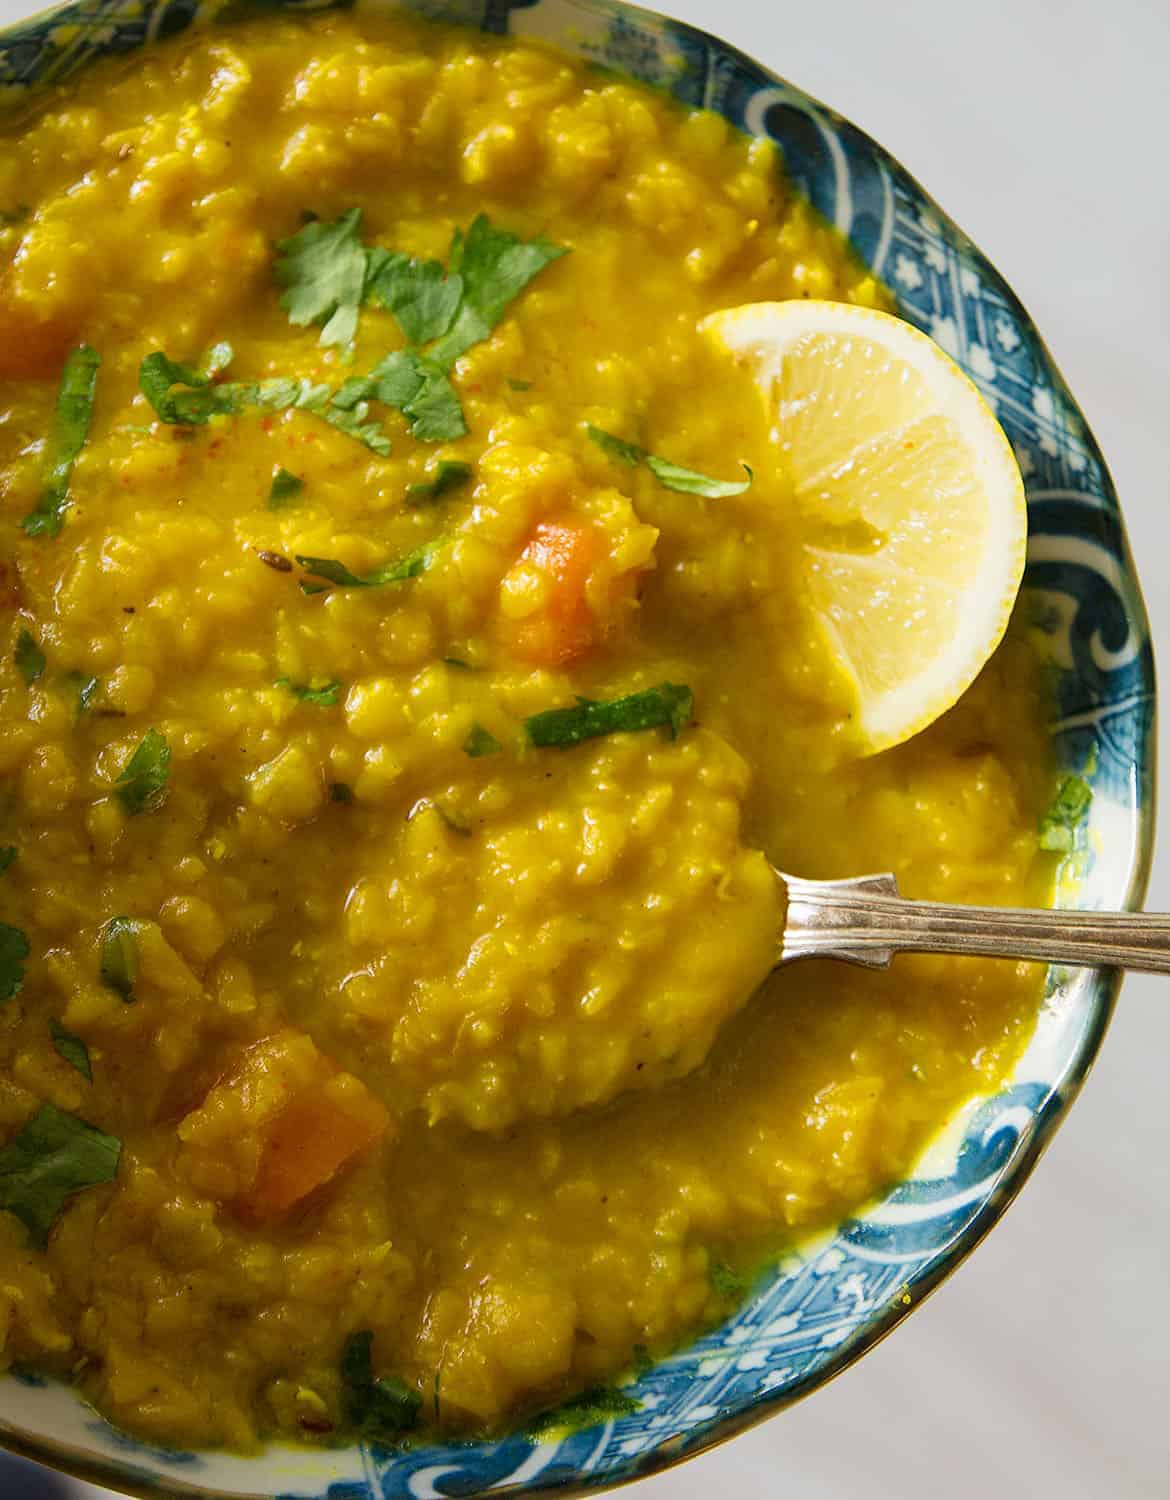 Red lentil soup in a blue bowl with a lemon wedge and a spoon over a white background.